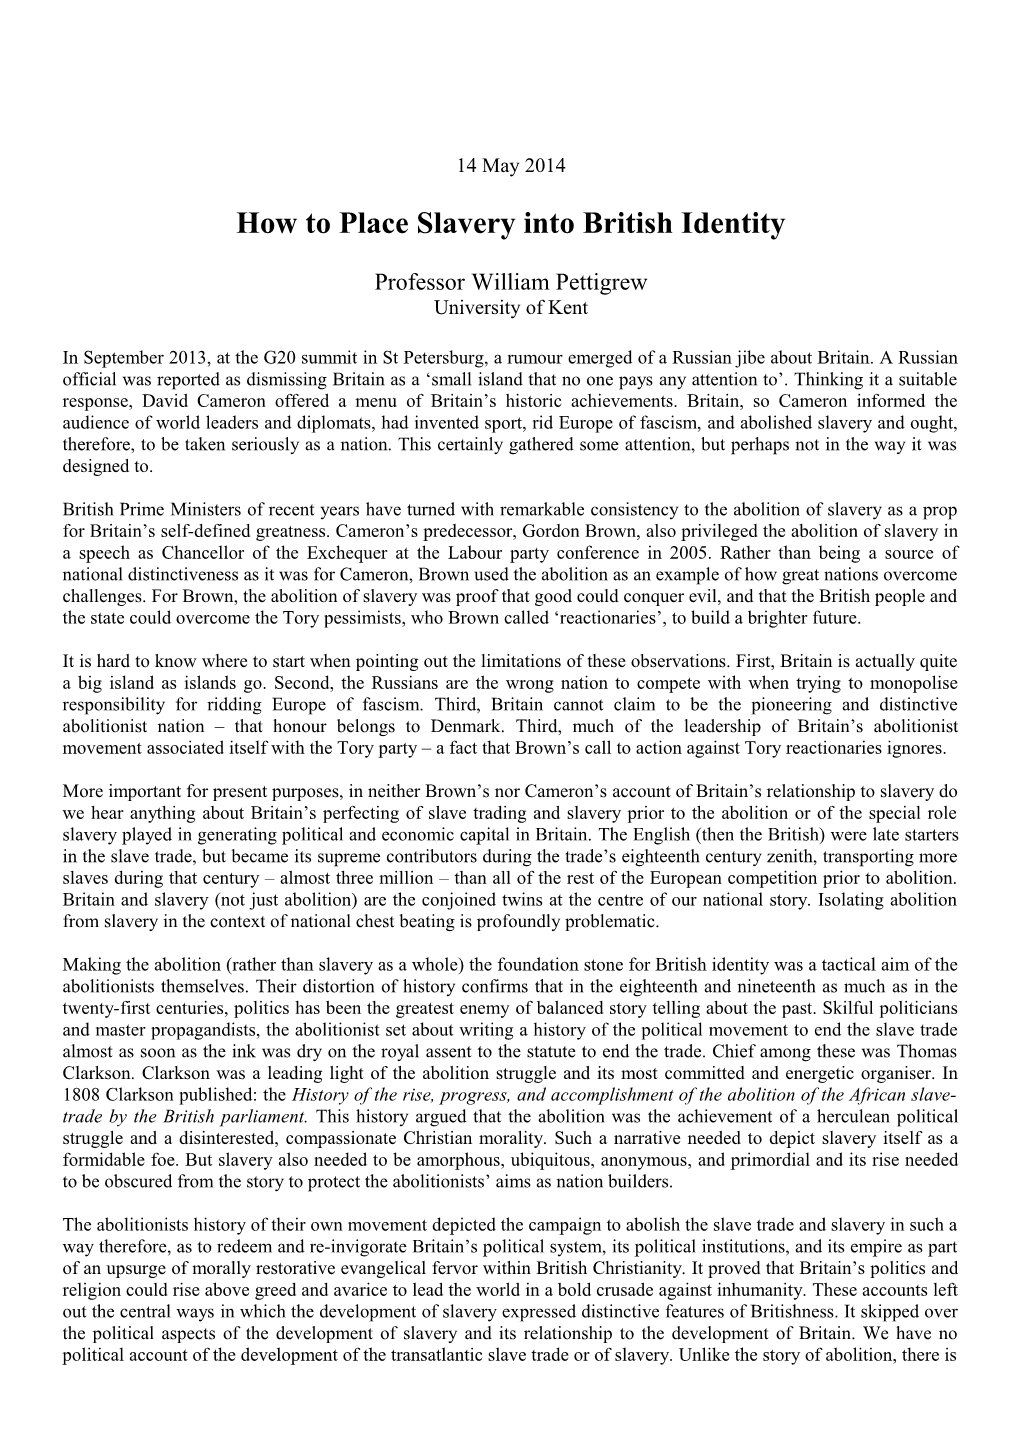 How to Place Slavery Into British Identity